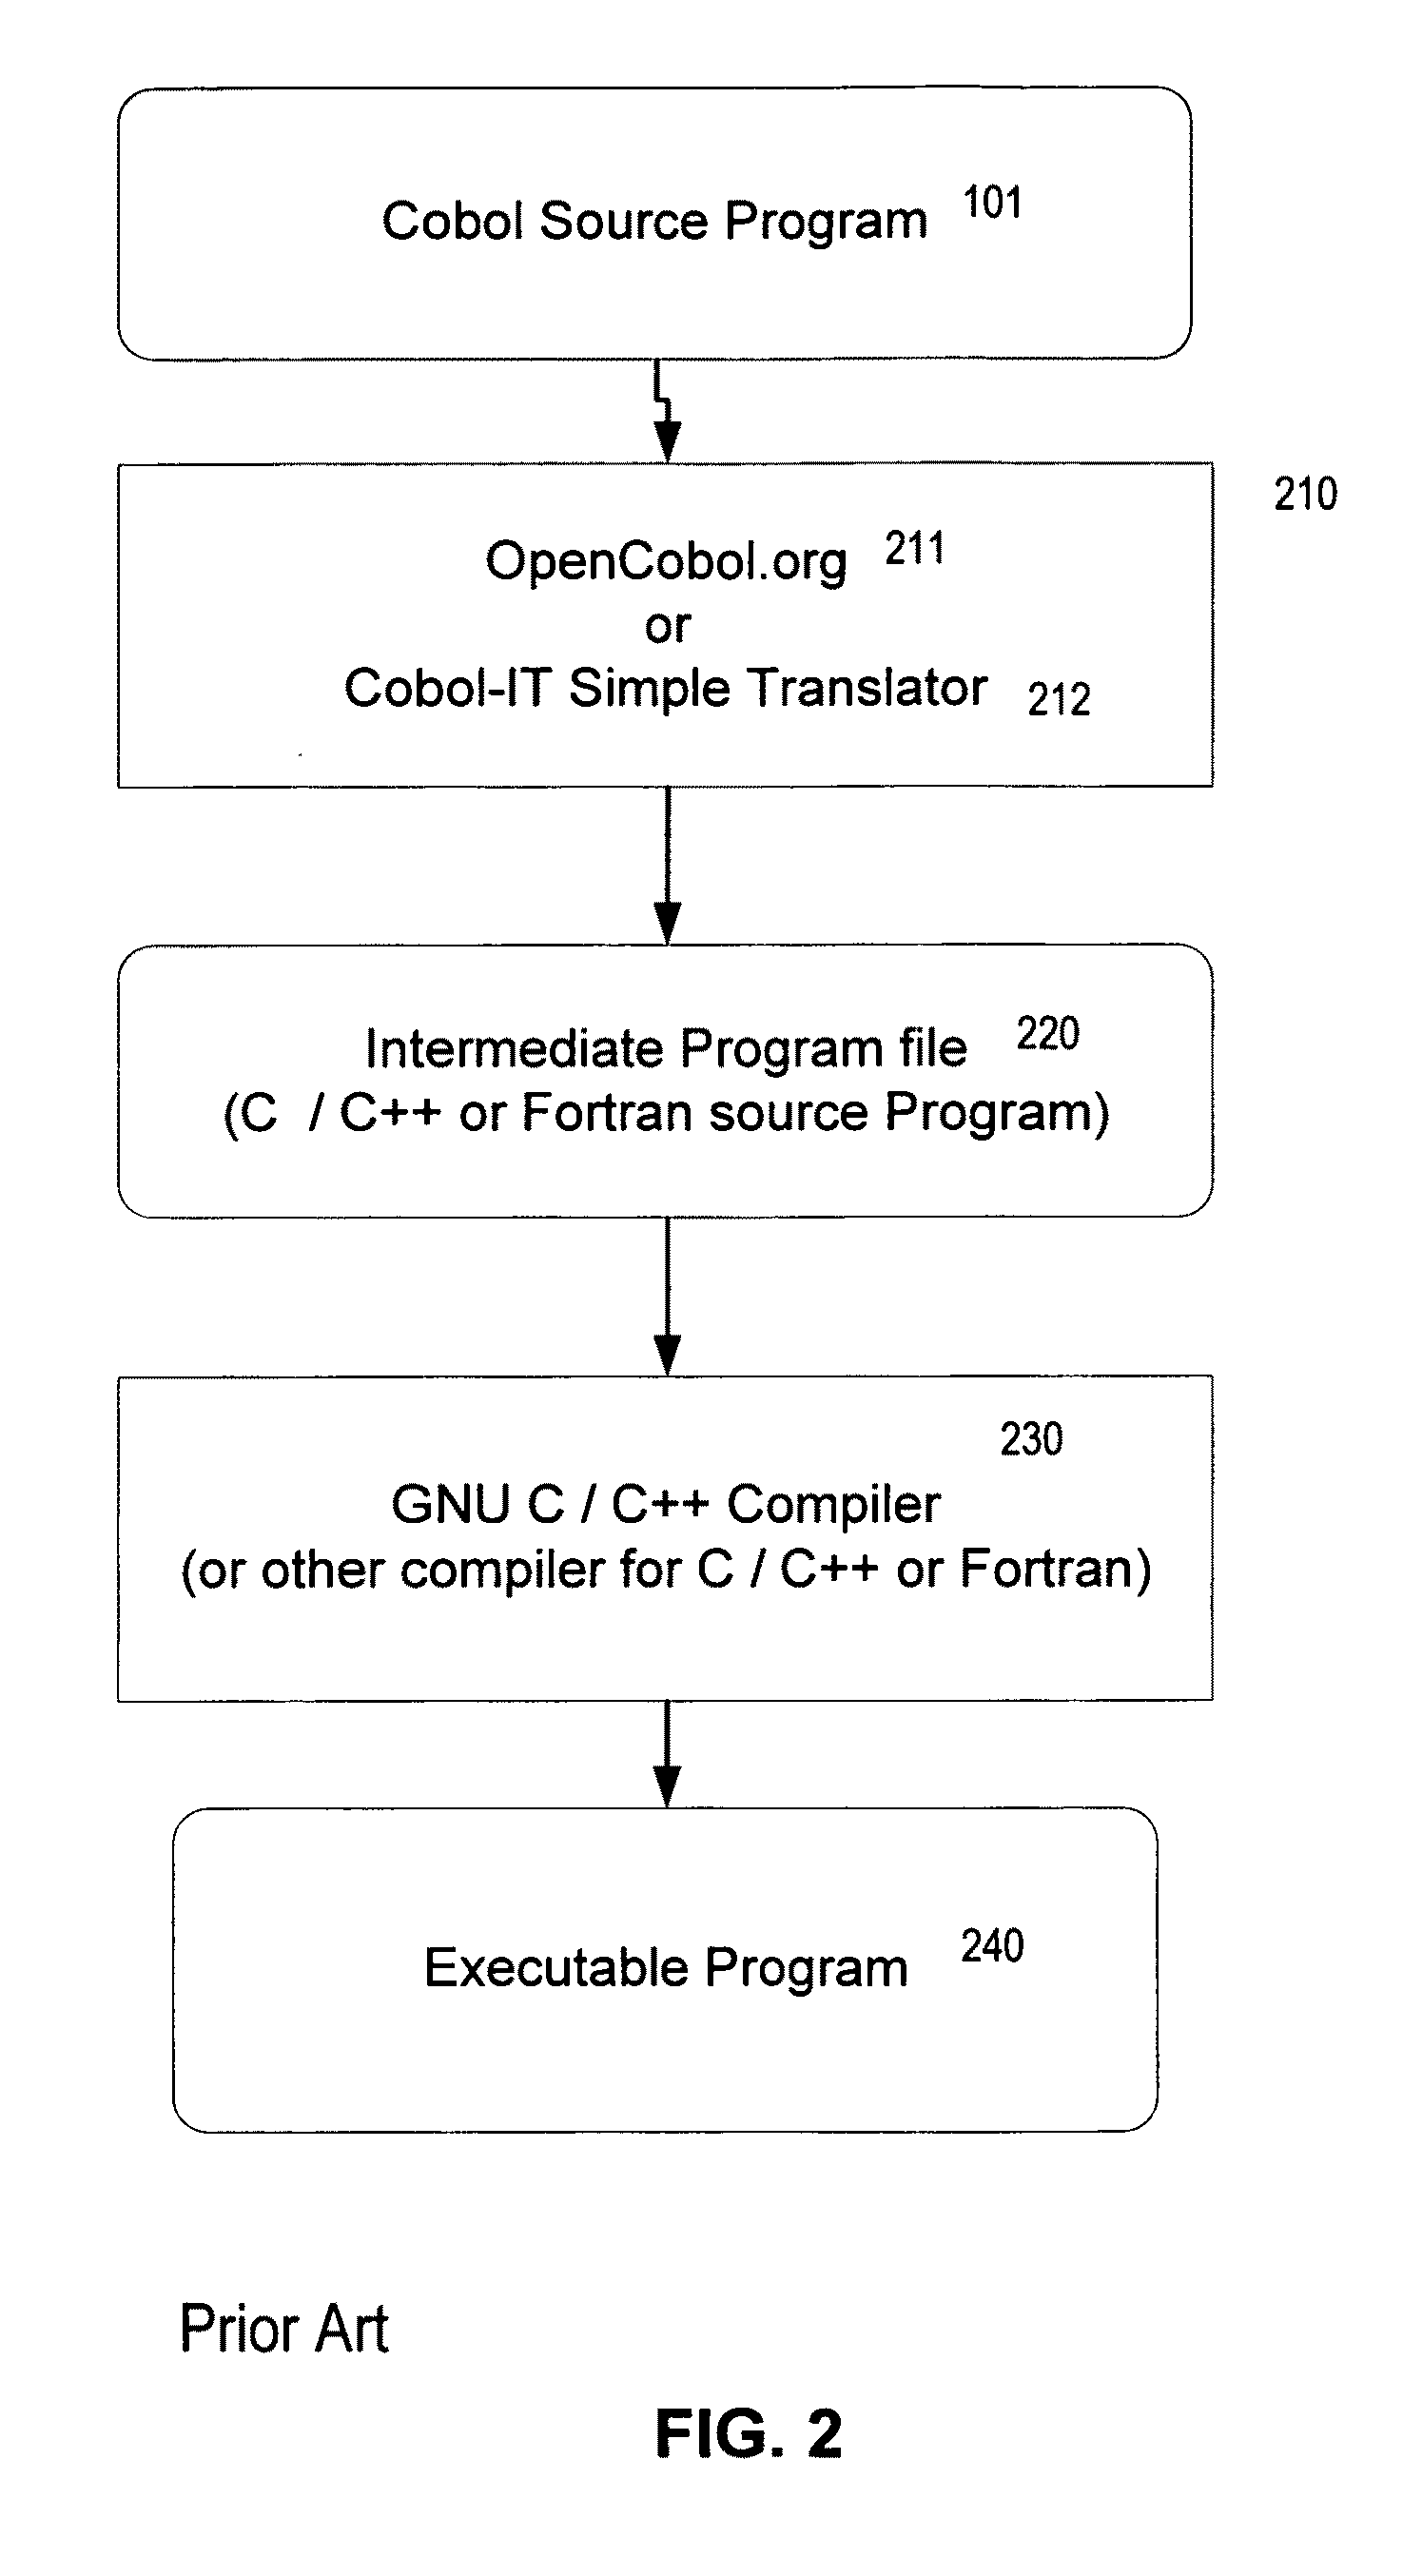 Method and apparatus for enabling parallel processing during execution of a cobol source program using two-stage compilation